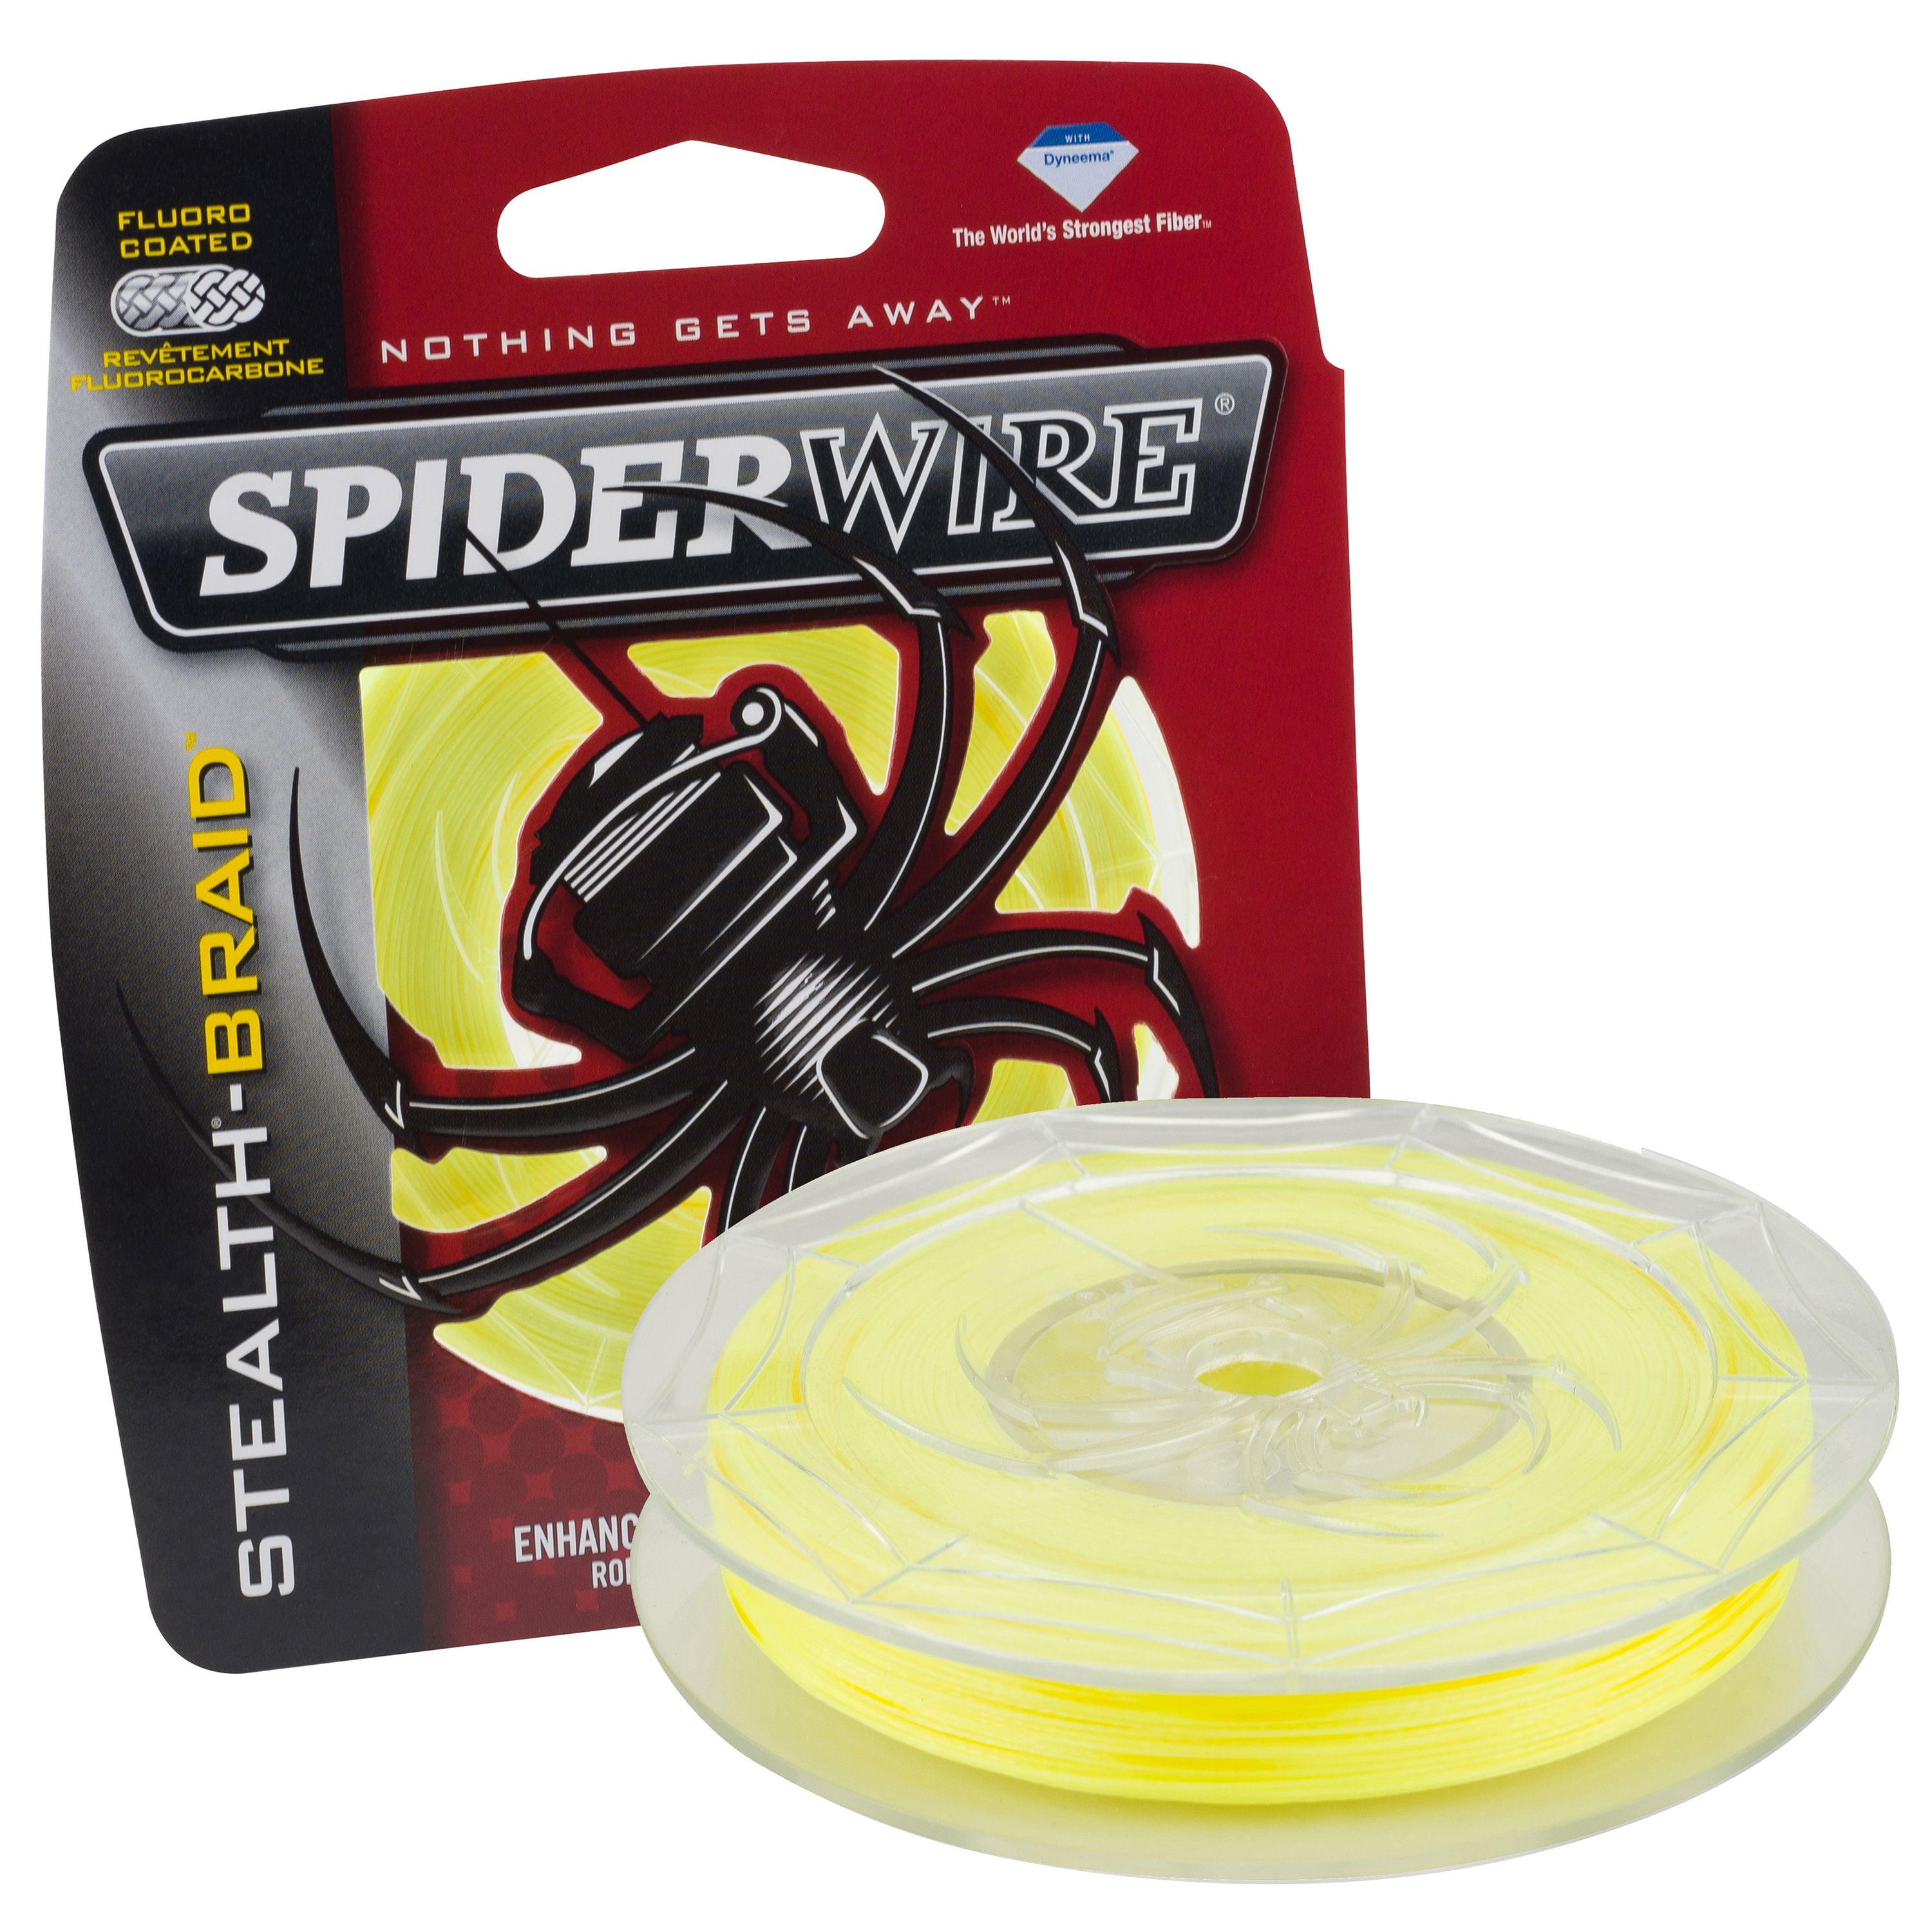 Spiderwire Stealth Braid Fishing Line Blue Camo 65lb 200yd for sale online 